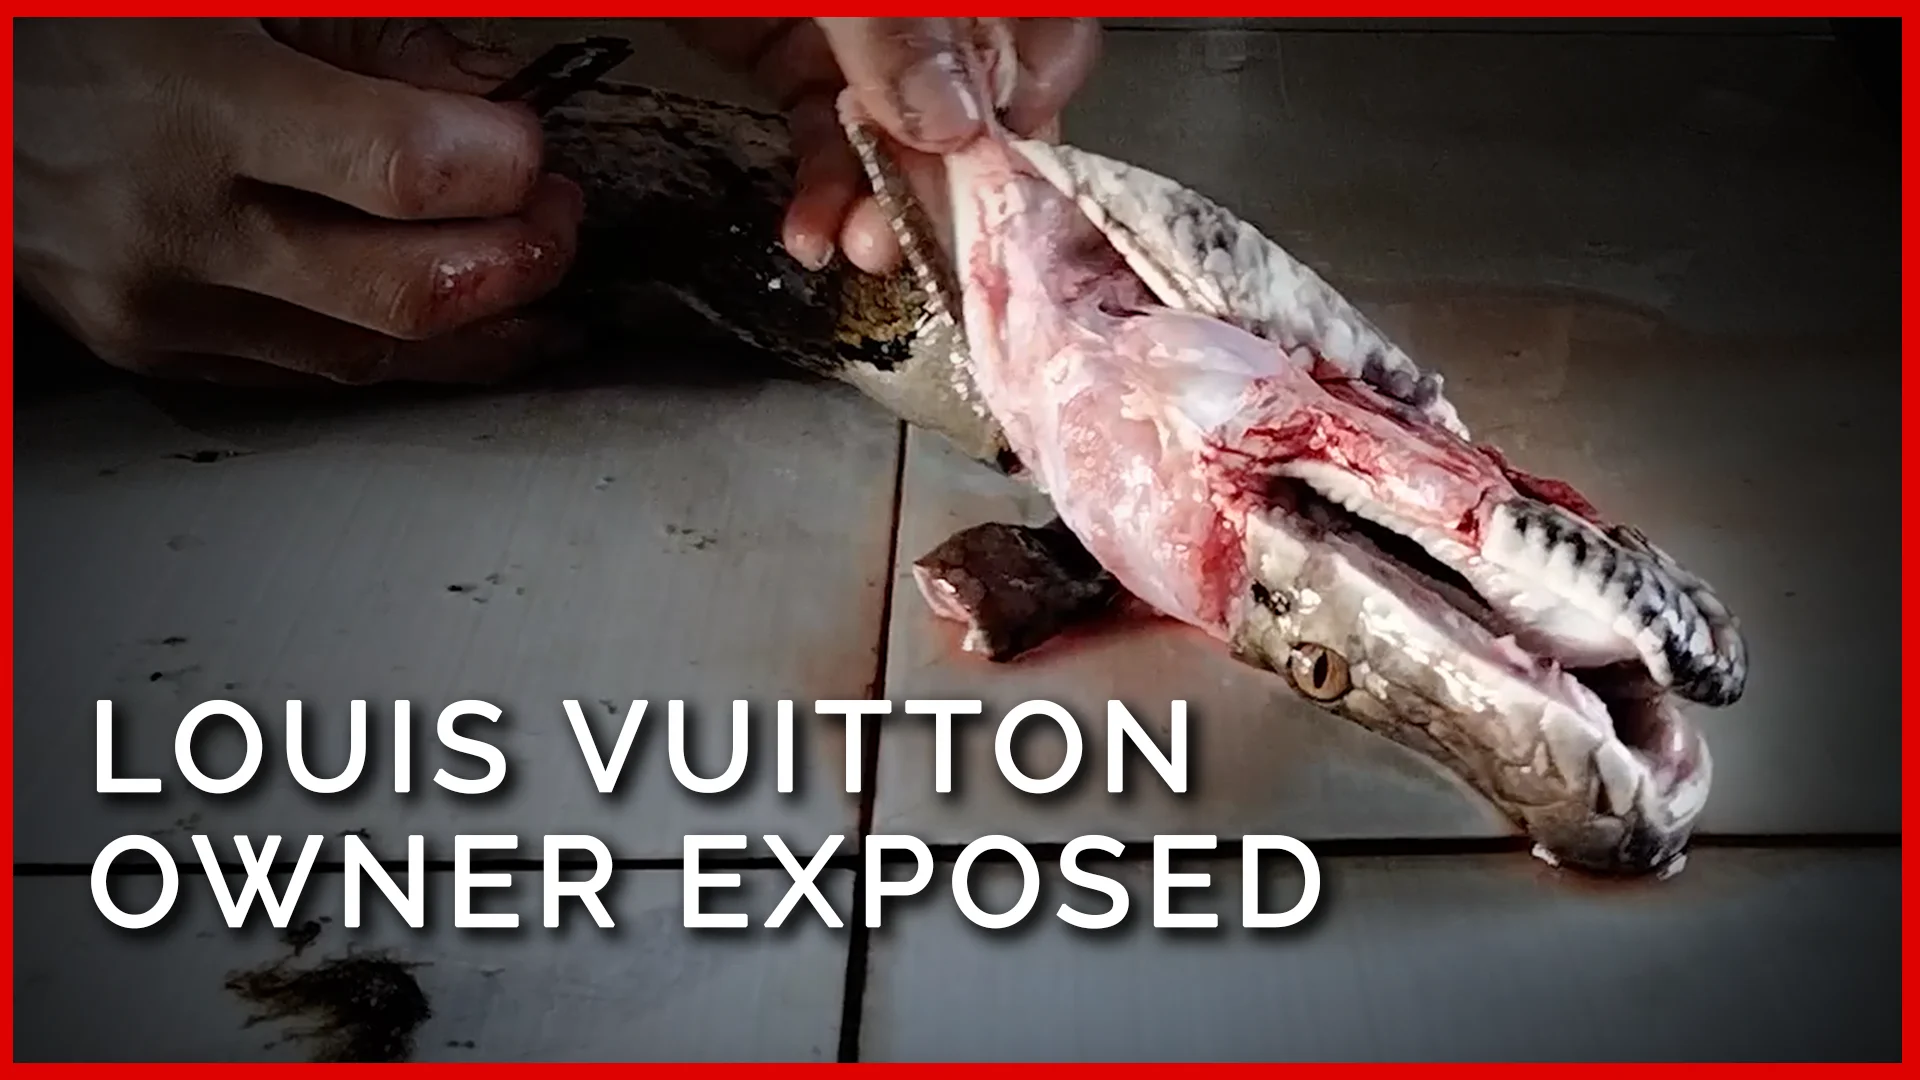 Louis Vuitton Owner Exposed: Workers Bash Pythons in the Head for